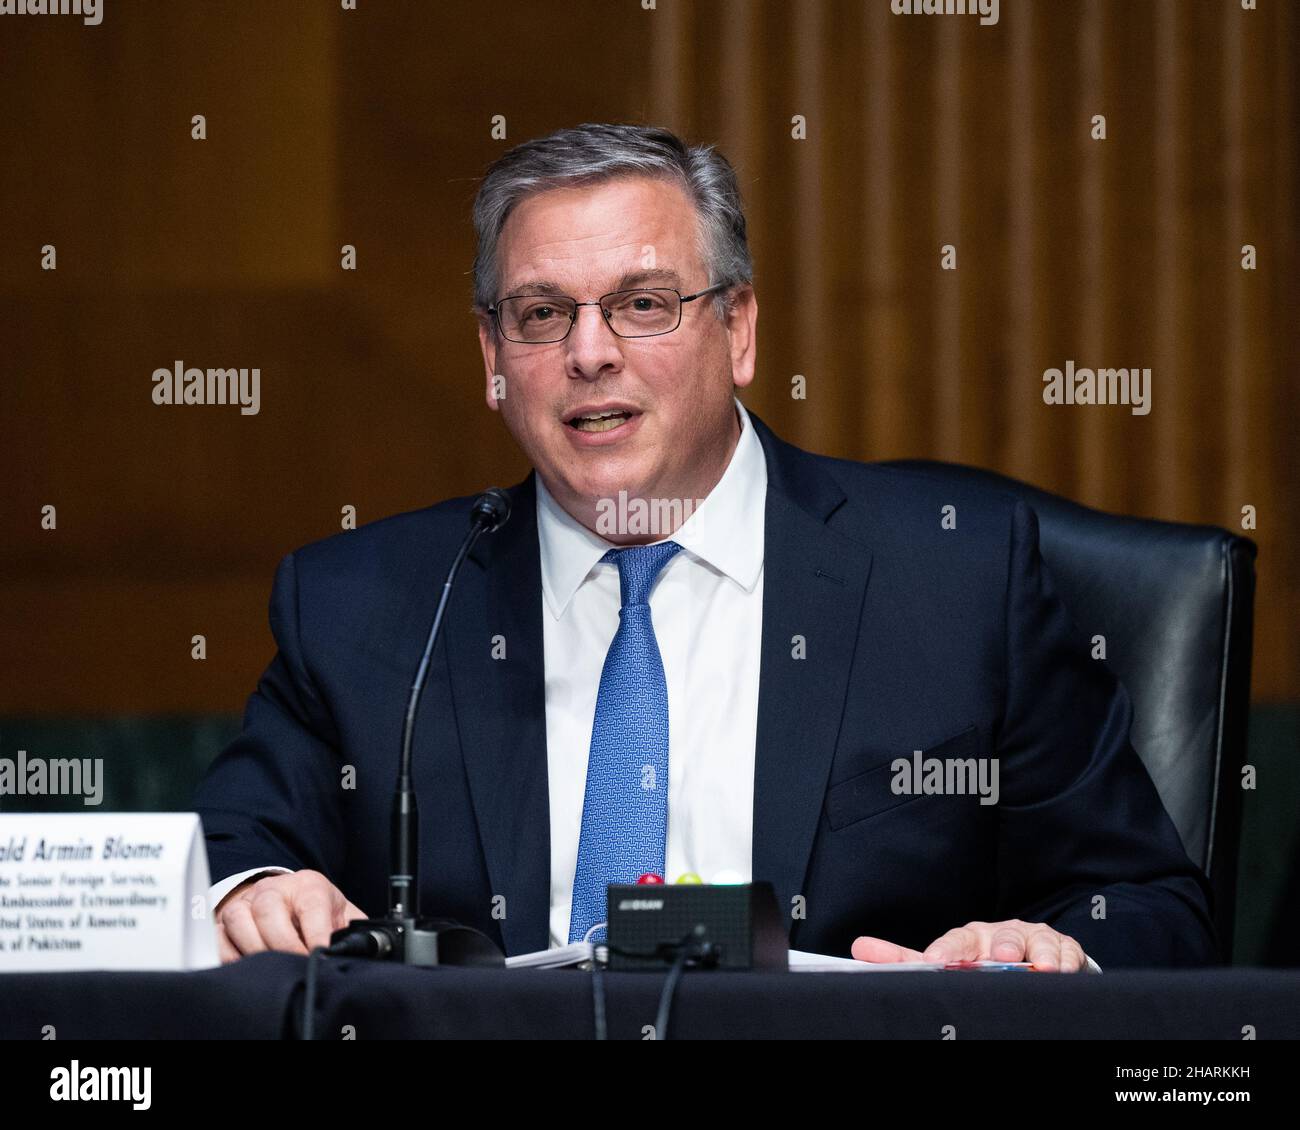 Washington, United States. 14th Dec, 2021. Donald Blome, nominee to be Ambassador to the Islamic Republic of Pakistan, speaks at a hearing of the Senate Foreign Relations Committee. Credit: SOPA Images Limited/Alamy Live News Stock Photo